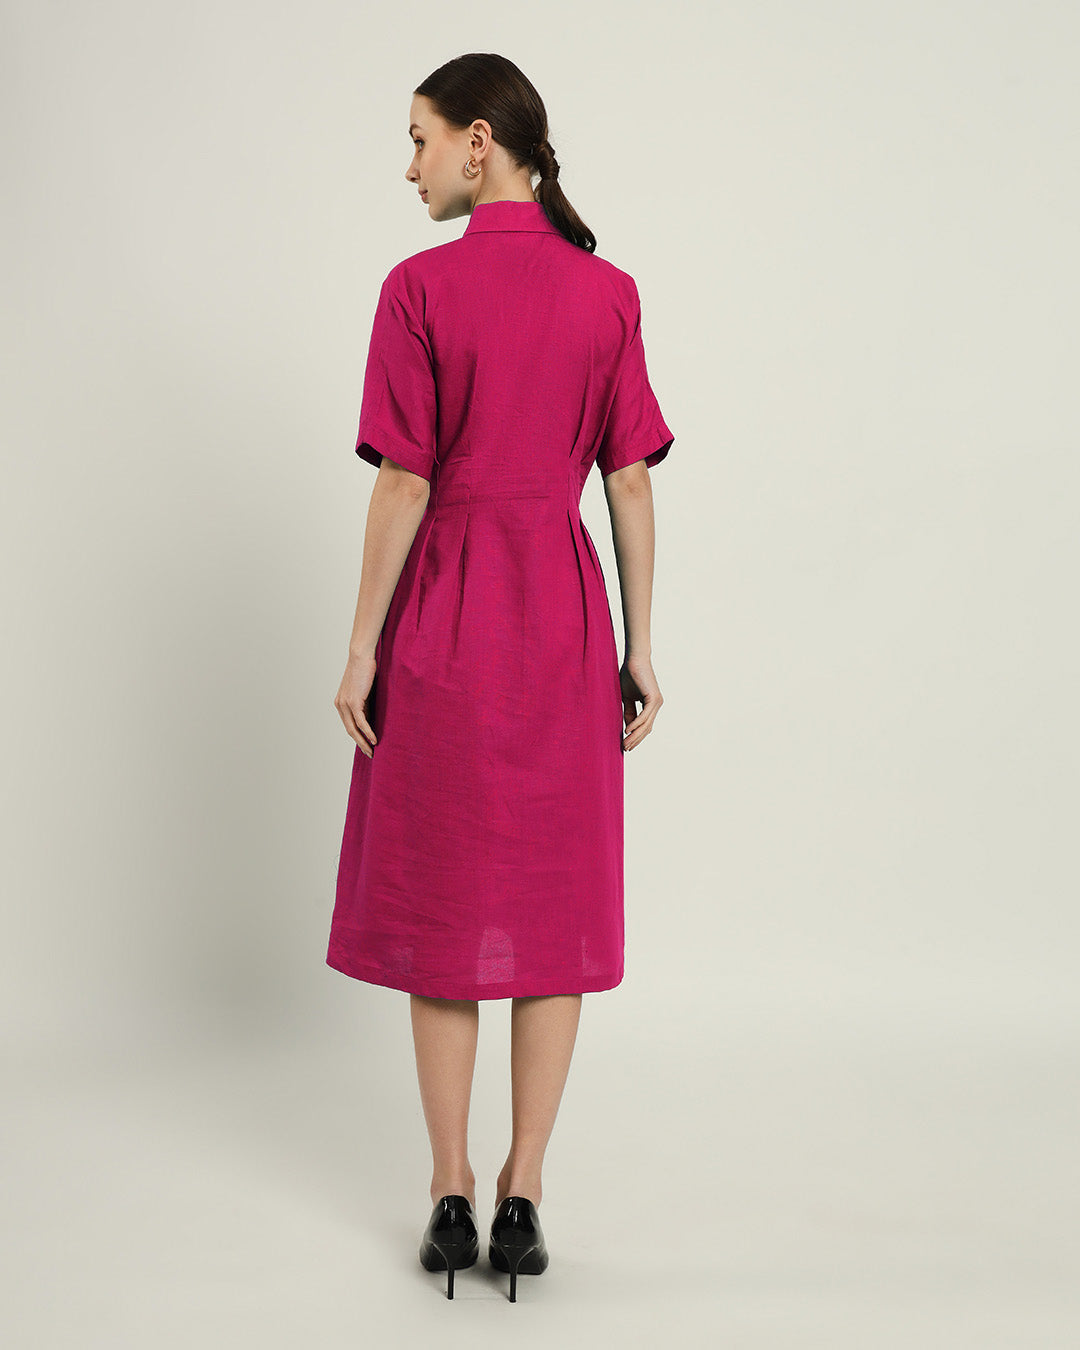 The Salford Berry Cotton Dress